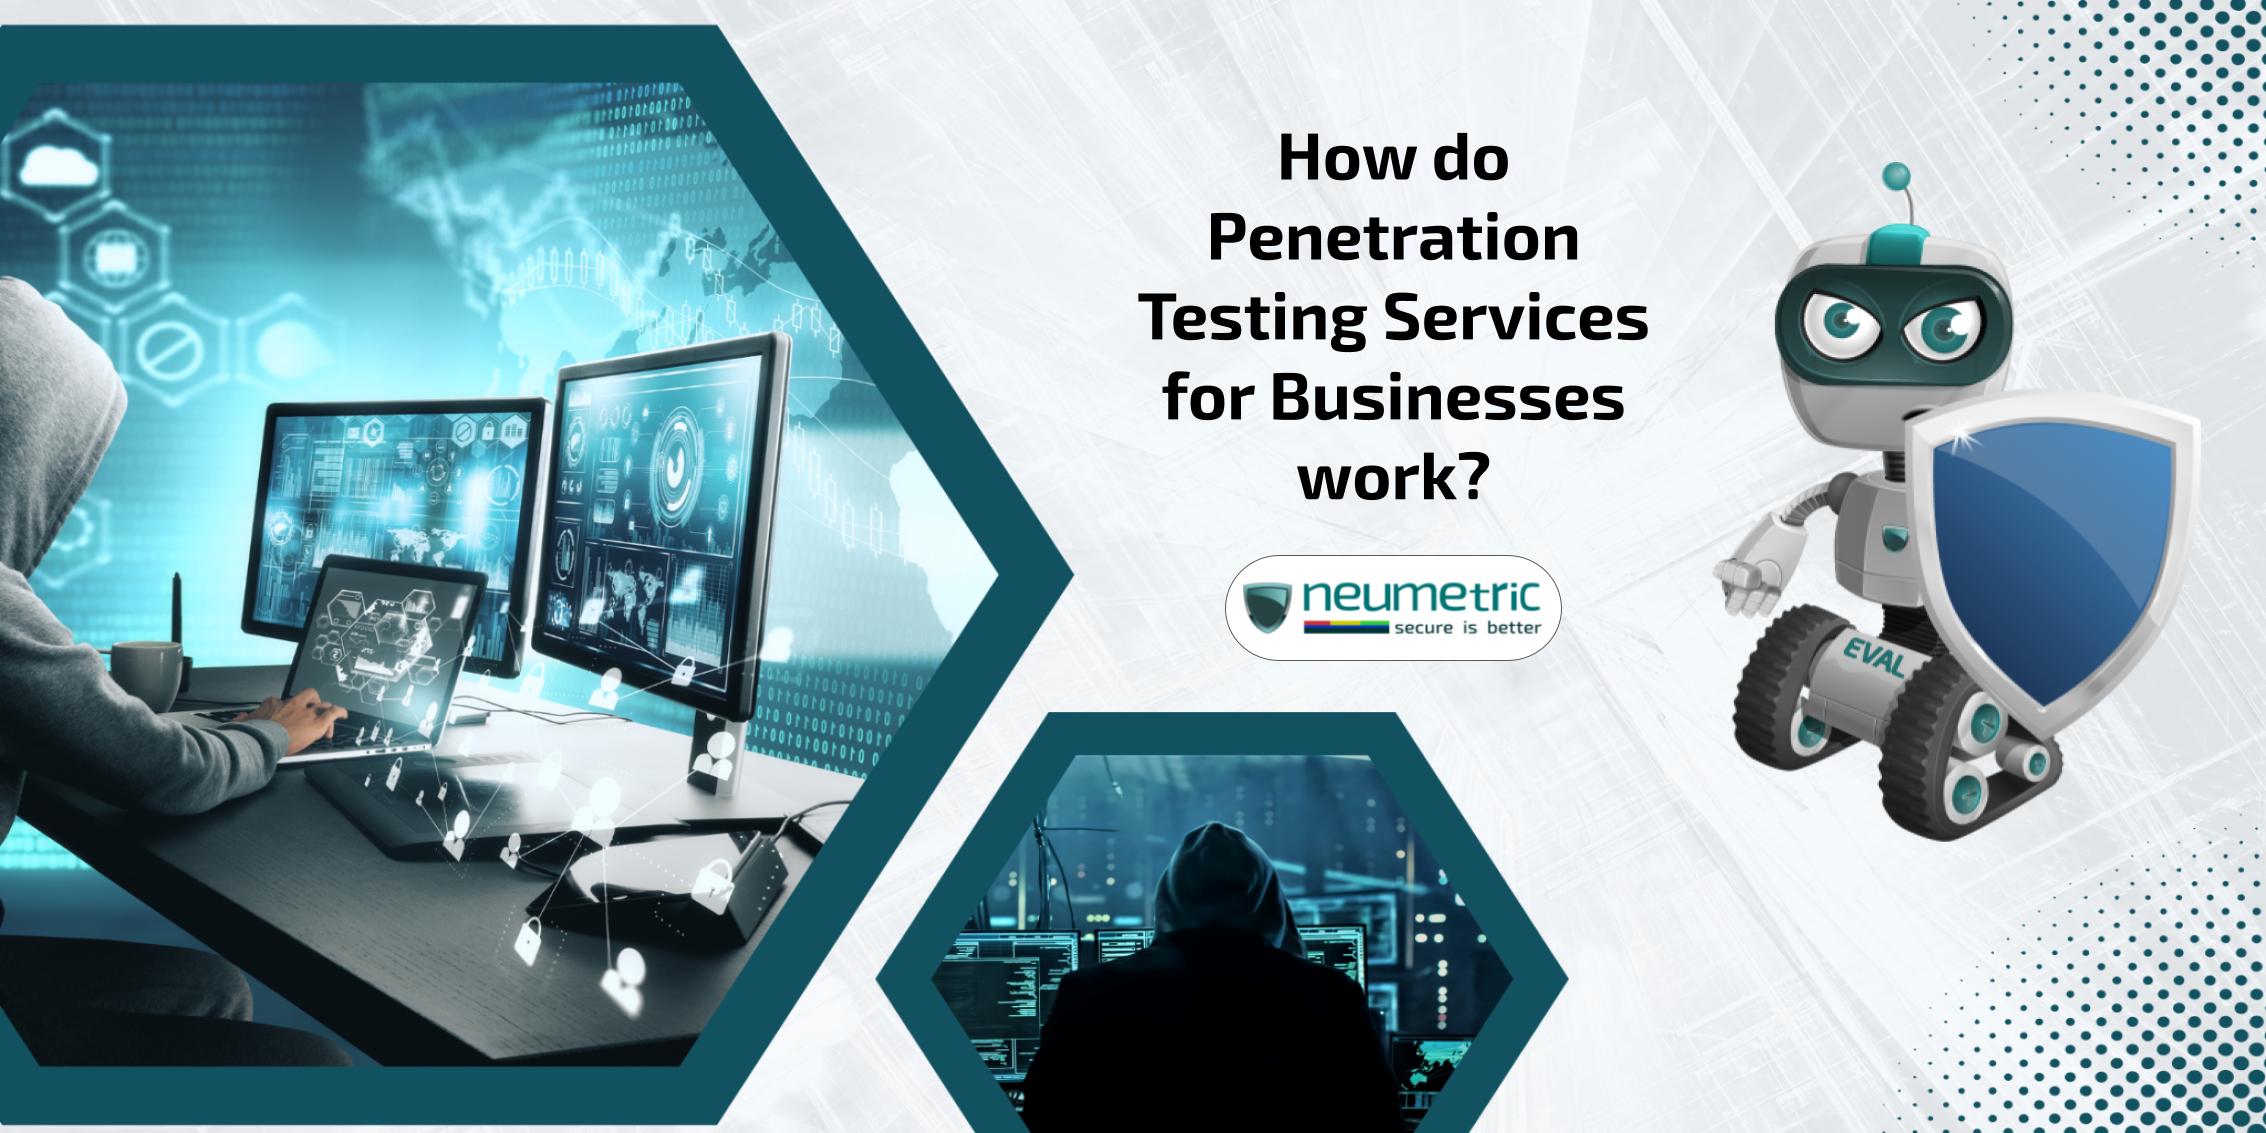 Penetration testing services for businesses